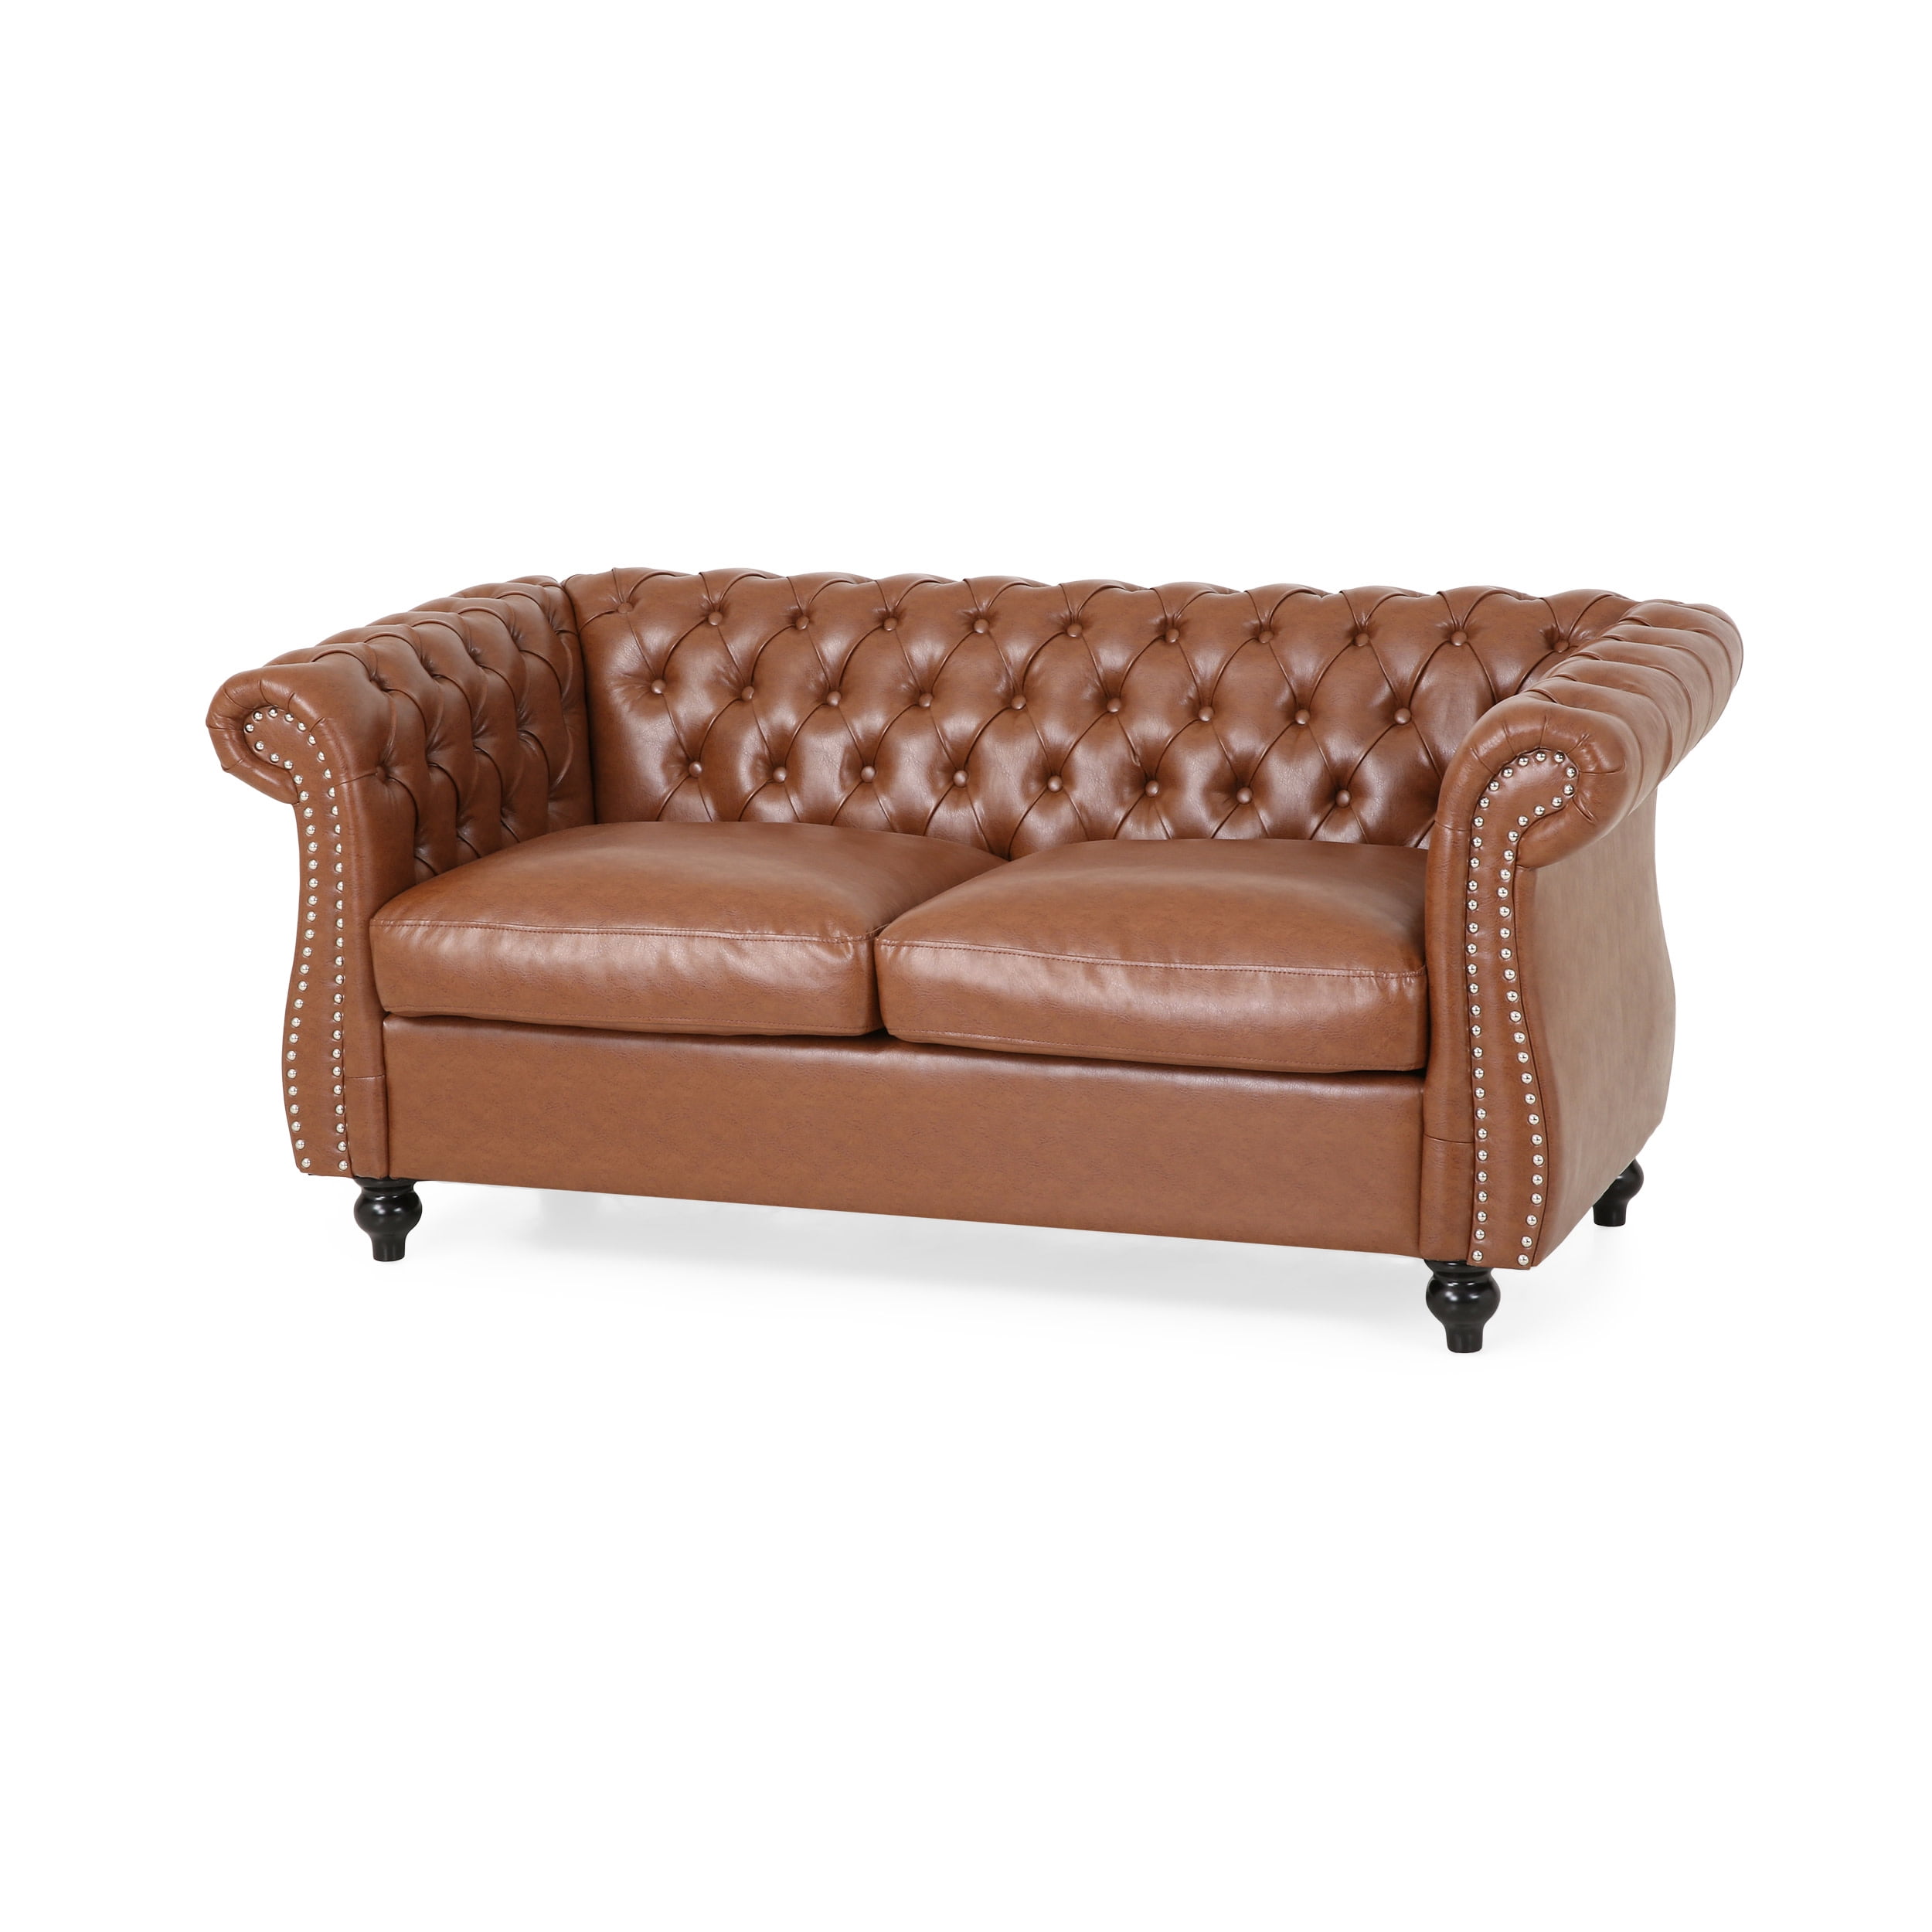 Gdfstudio Madelena Traditional Chesterfield Loveseat